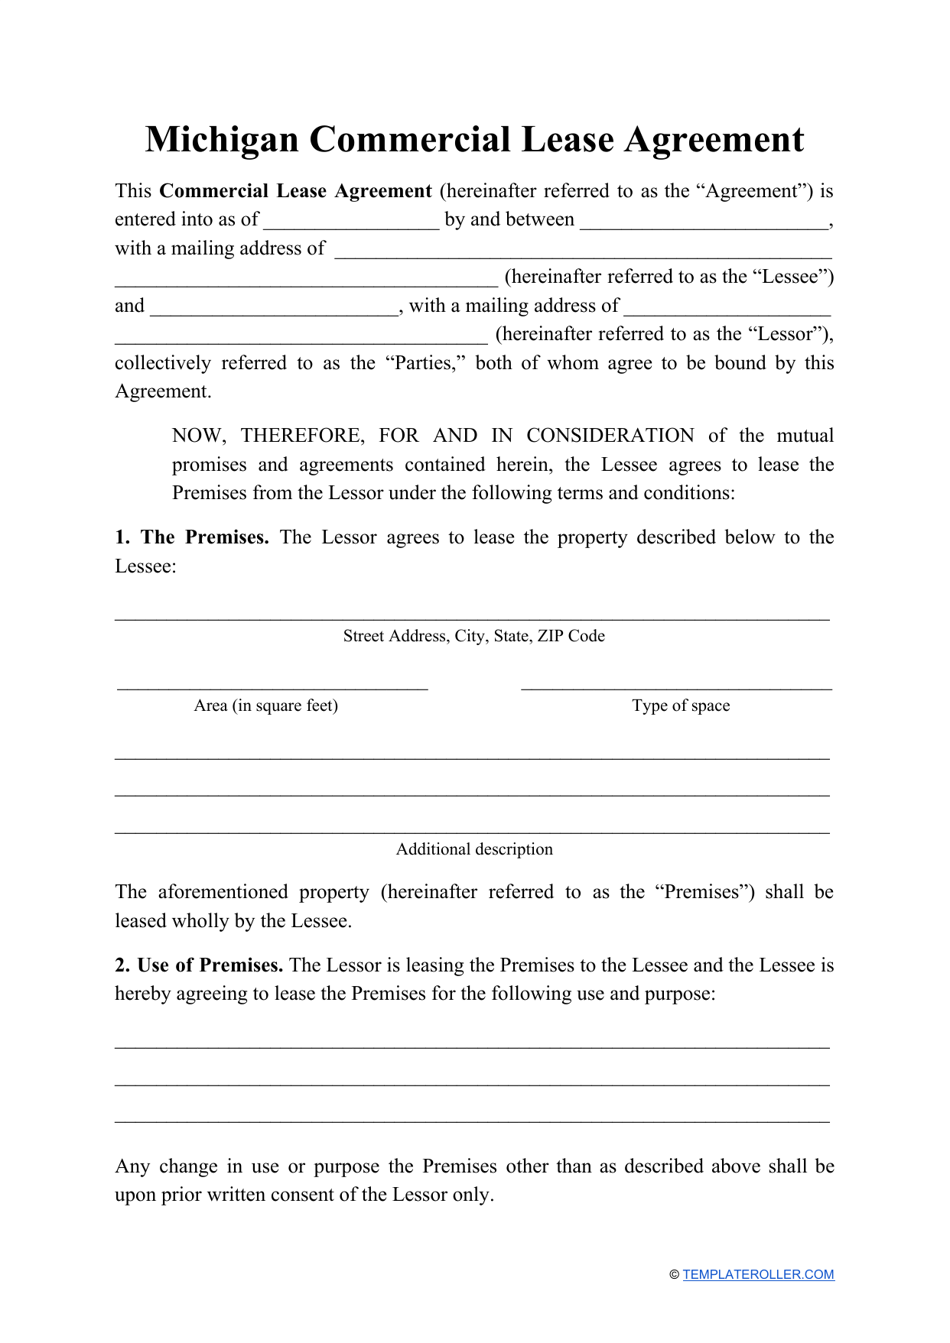 Commercial Lease Agreement Template - Michigan, Page 1